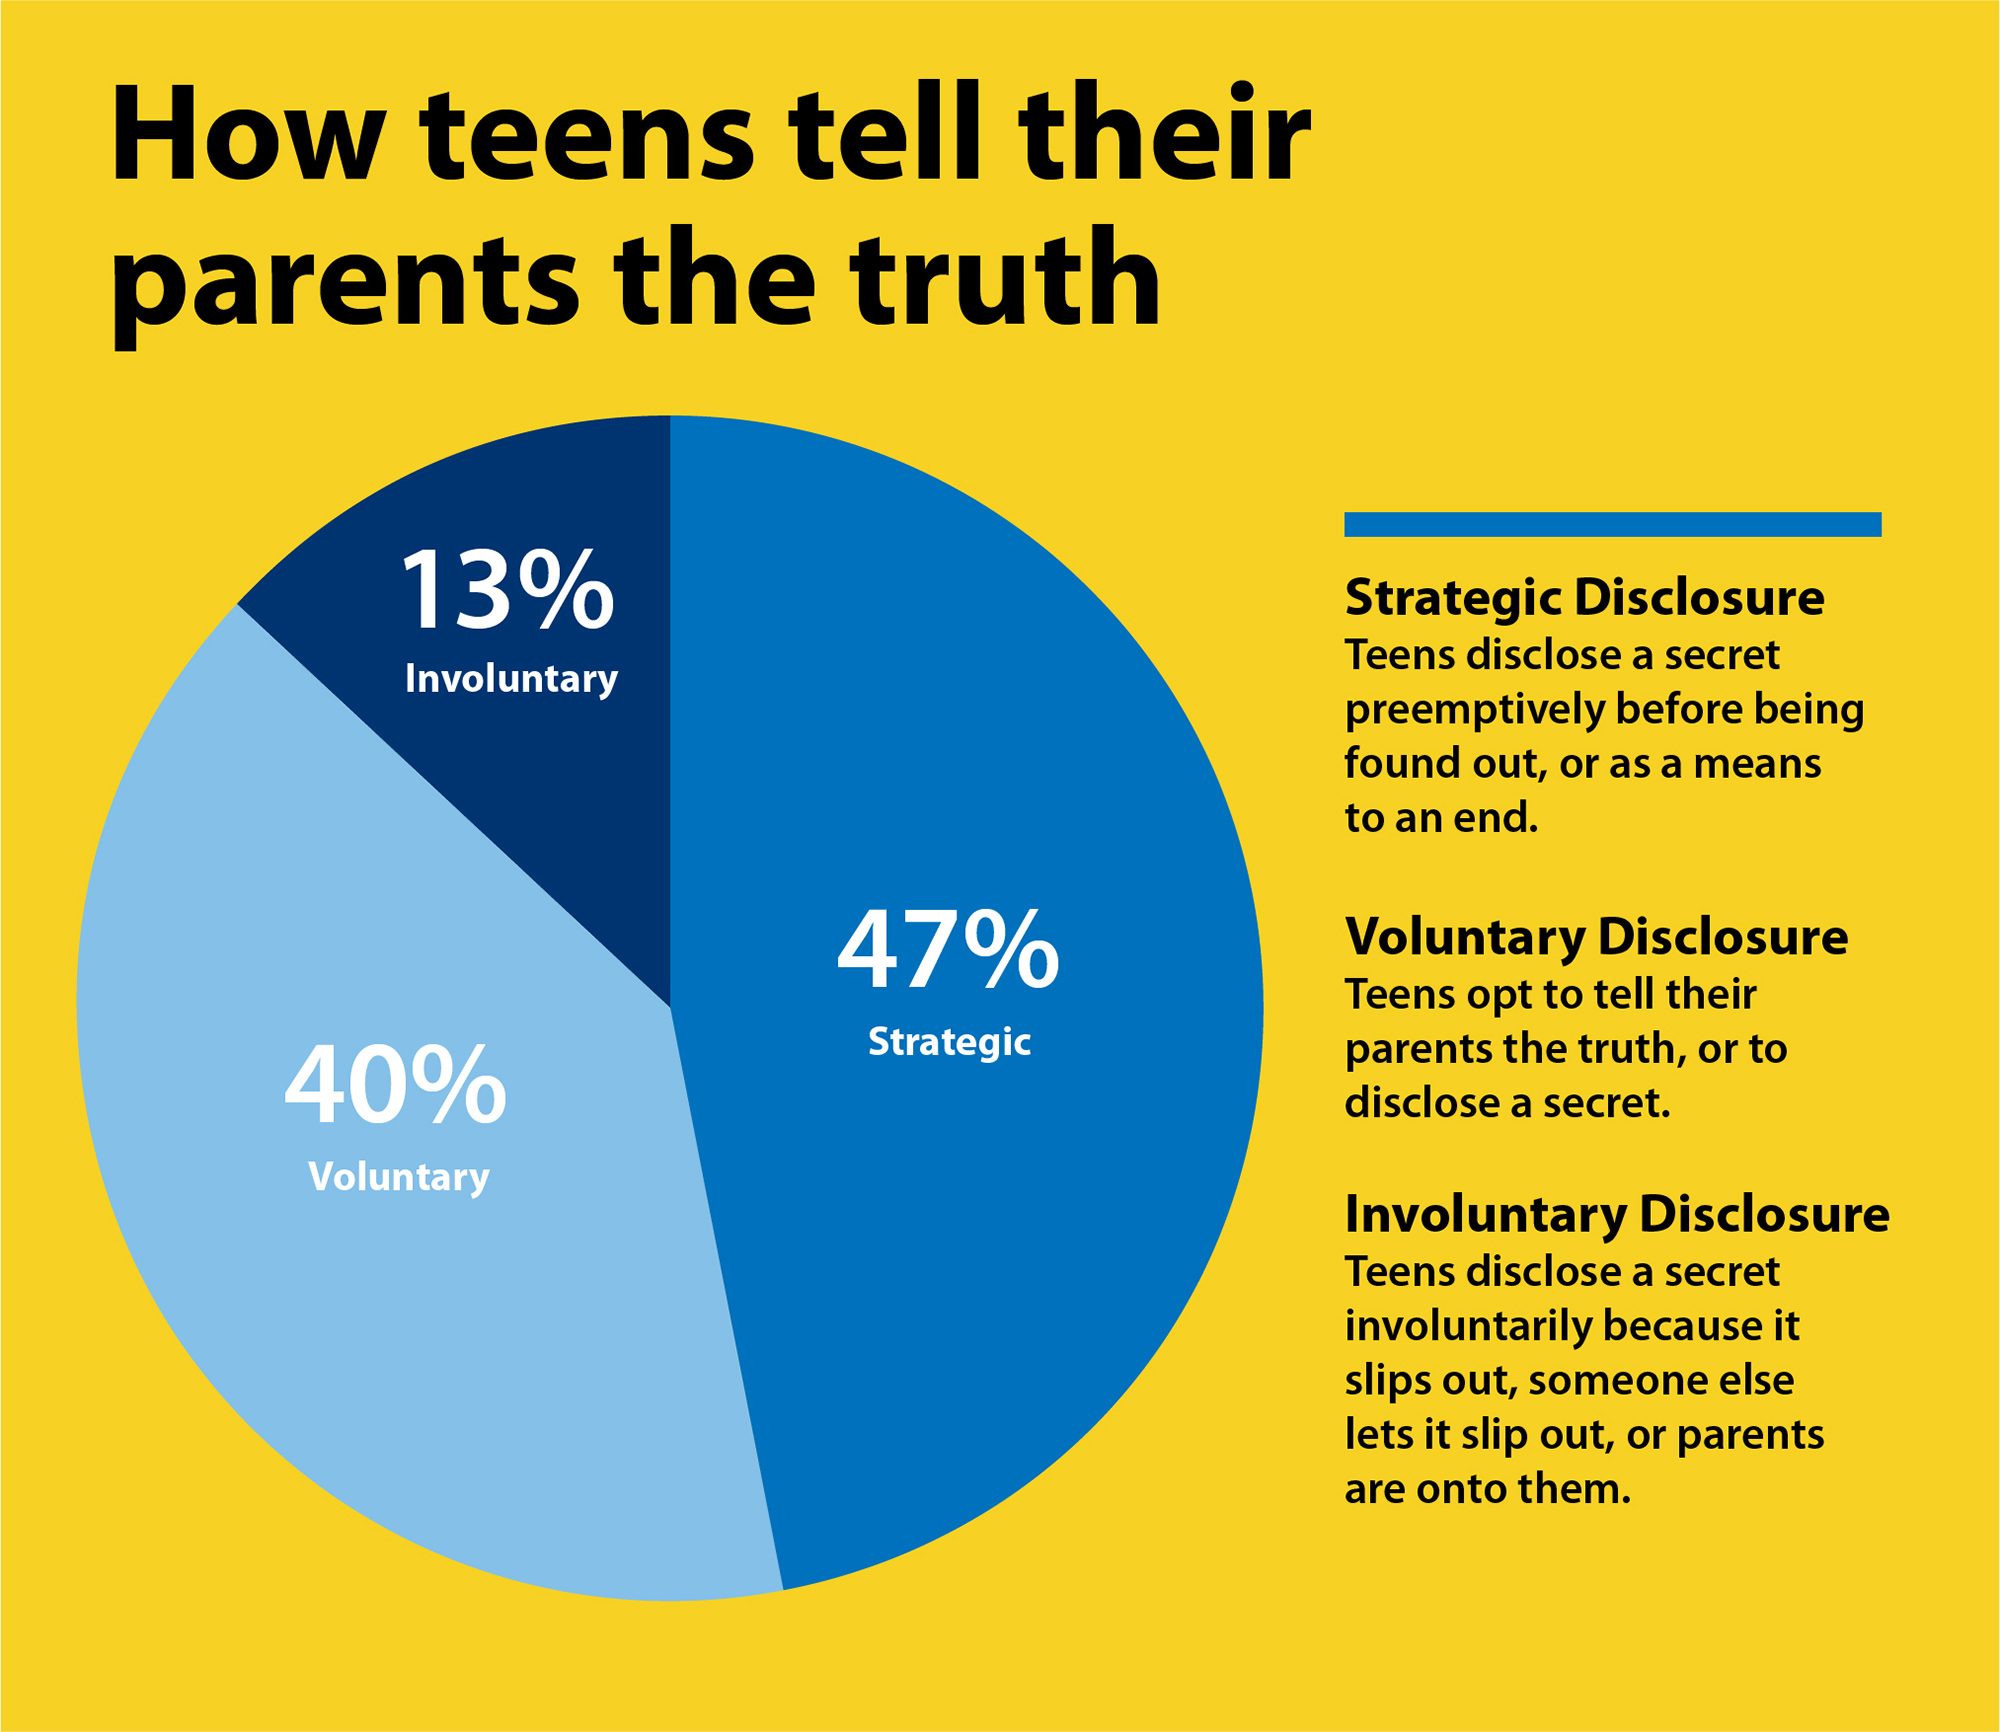 Pie chart with the title HOW TEENS TELL THE TRUST show the 47% are strategic, disclosing a secret before being found out; 40% are voluntary, opting to tell their parents the truth; and 13% are involuntary, telling a secret because it slips out, someone else lets it slip out, of their parents are on to them.